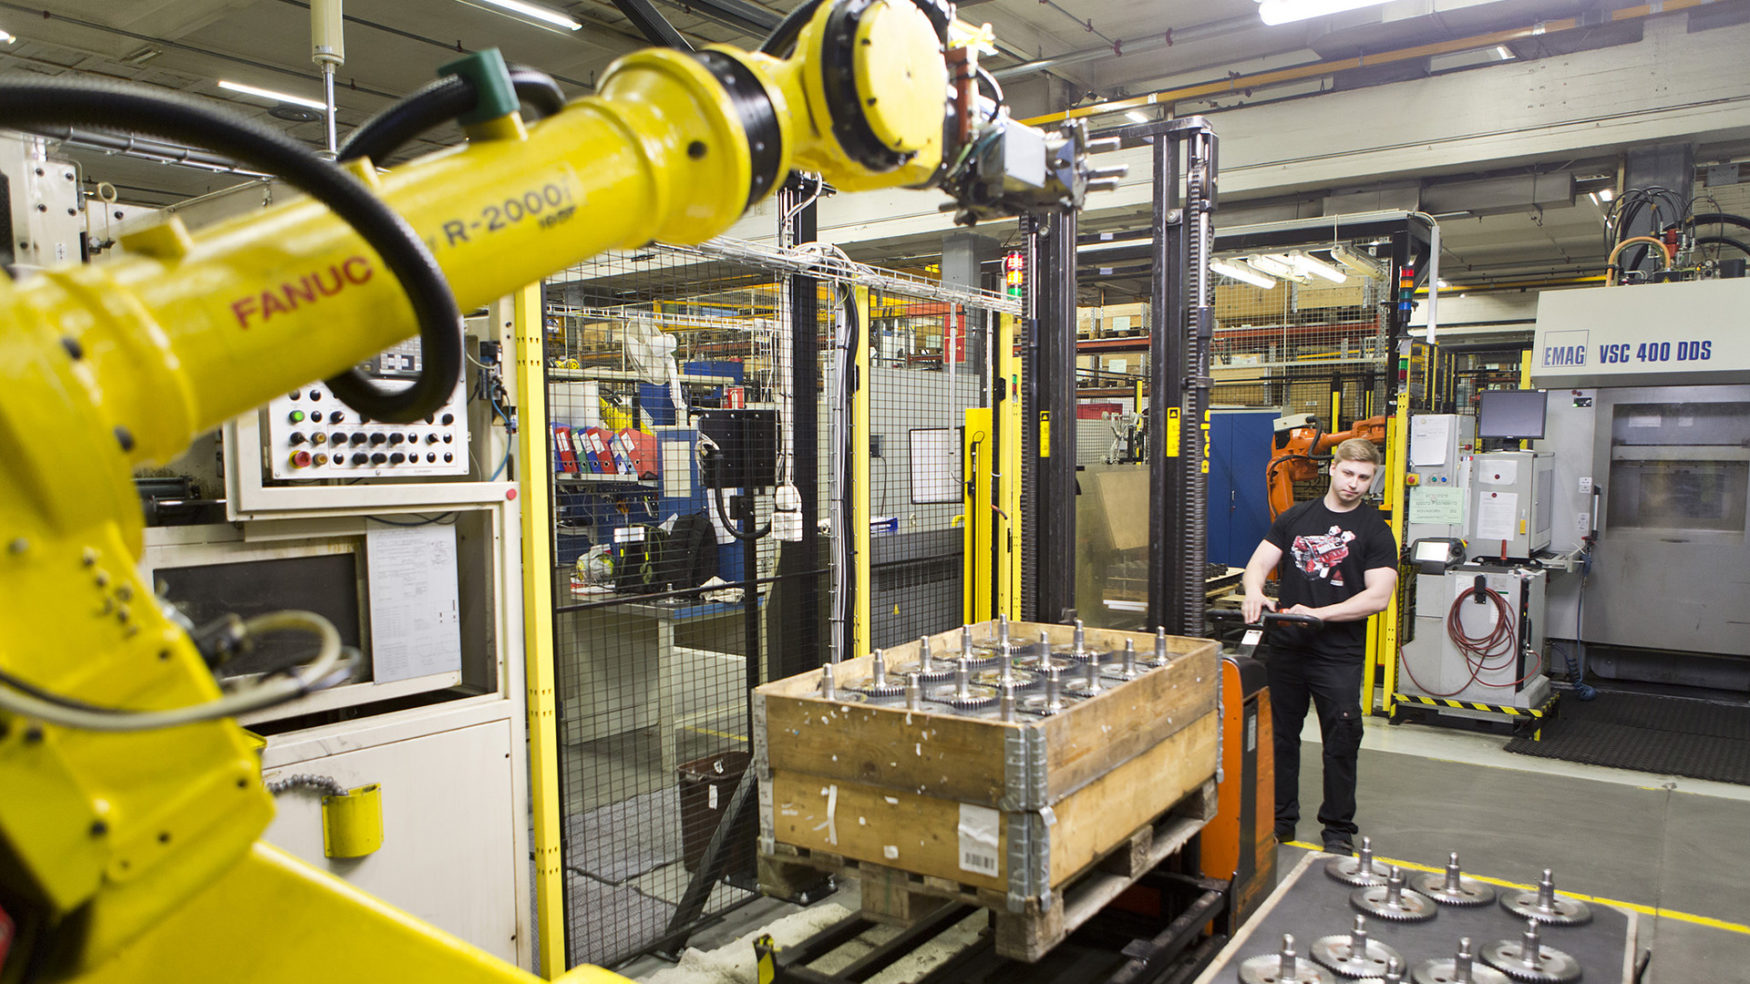 Intelligent machinery is one of the key industries in Tampere